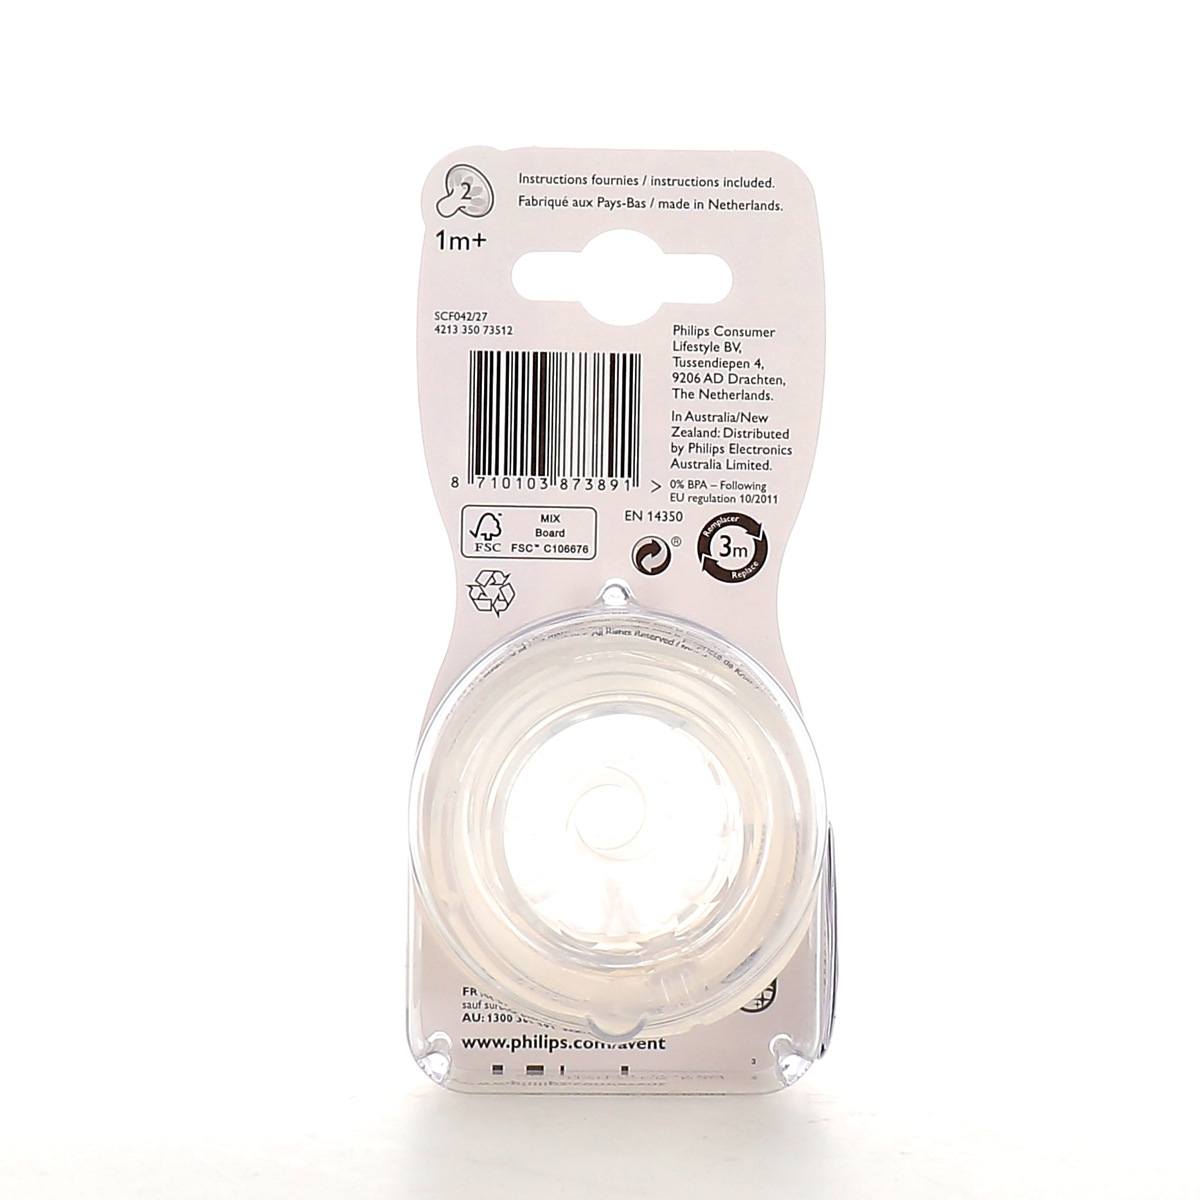 Tétine Philips Avent Natural 2.0